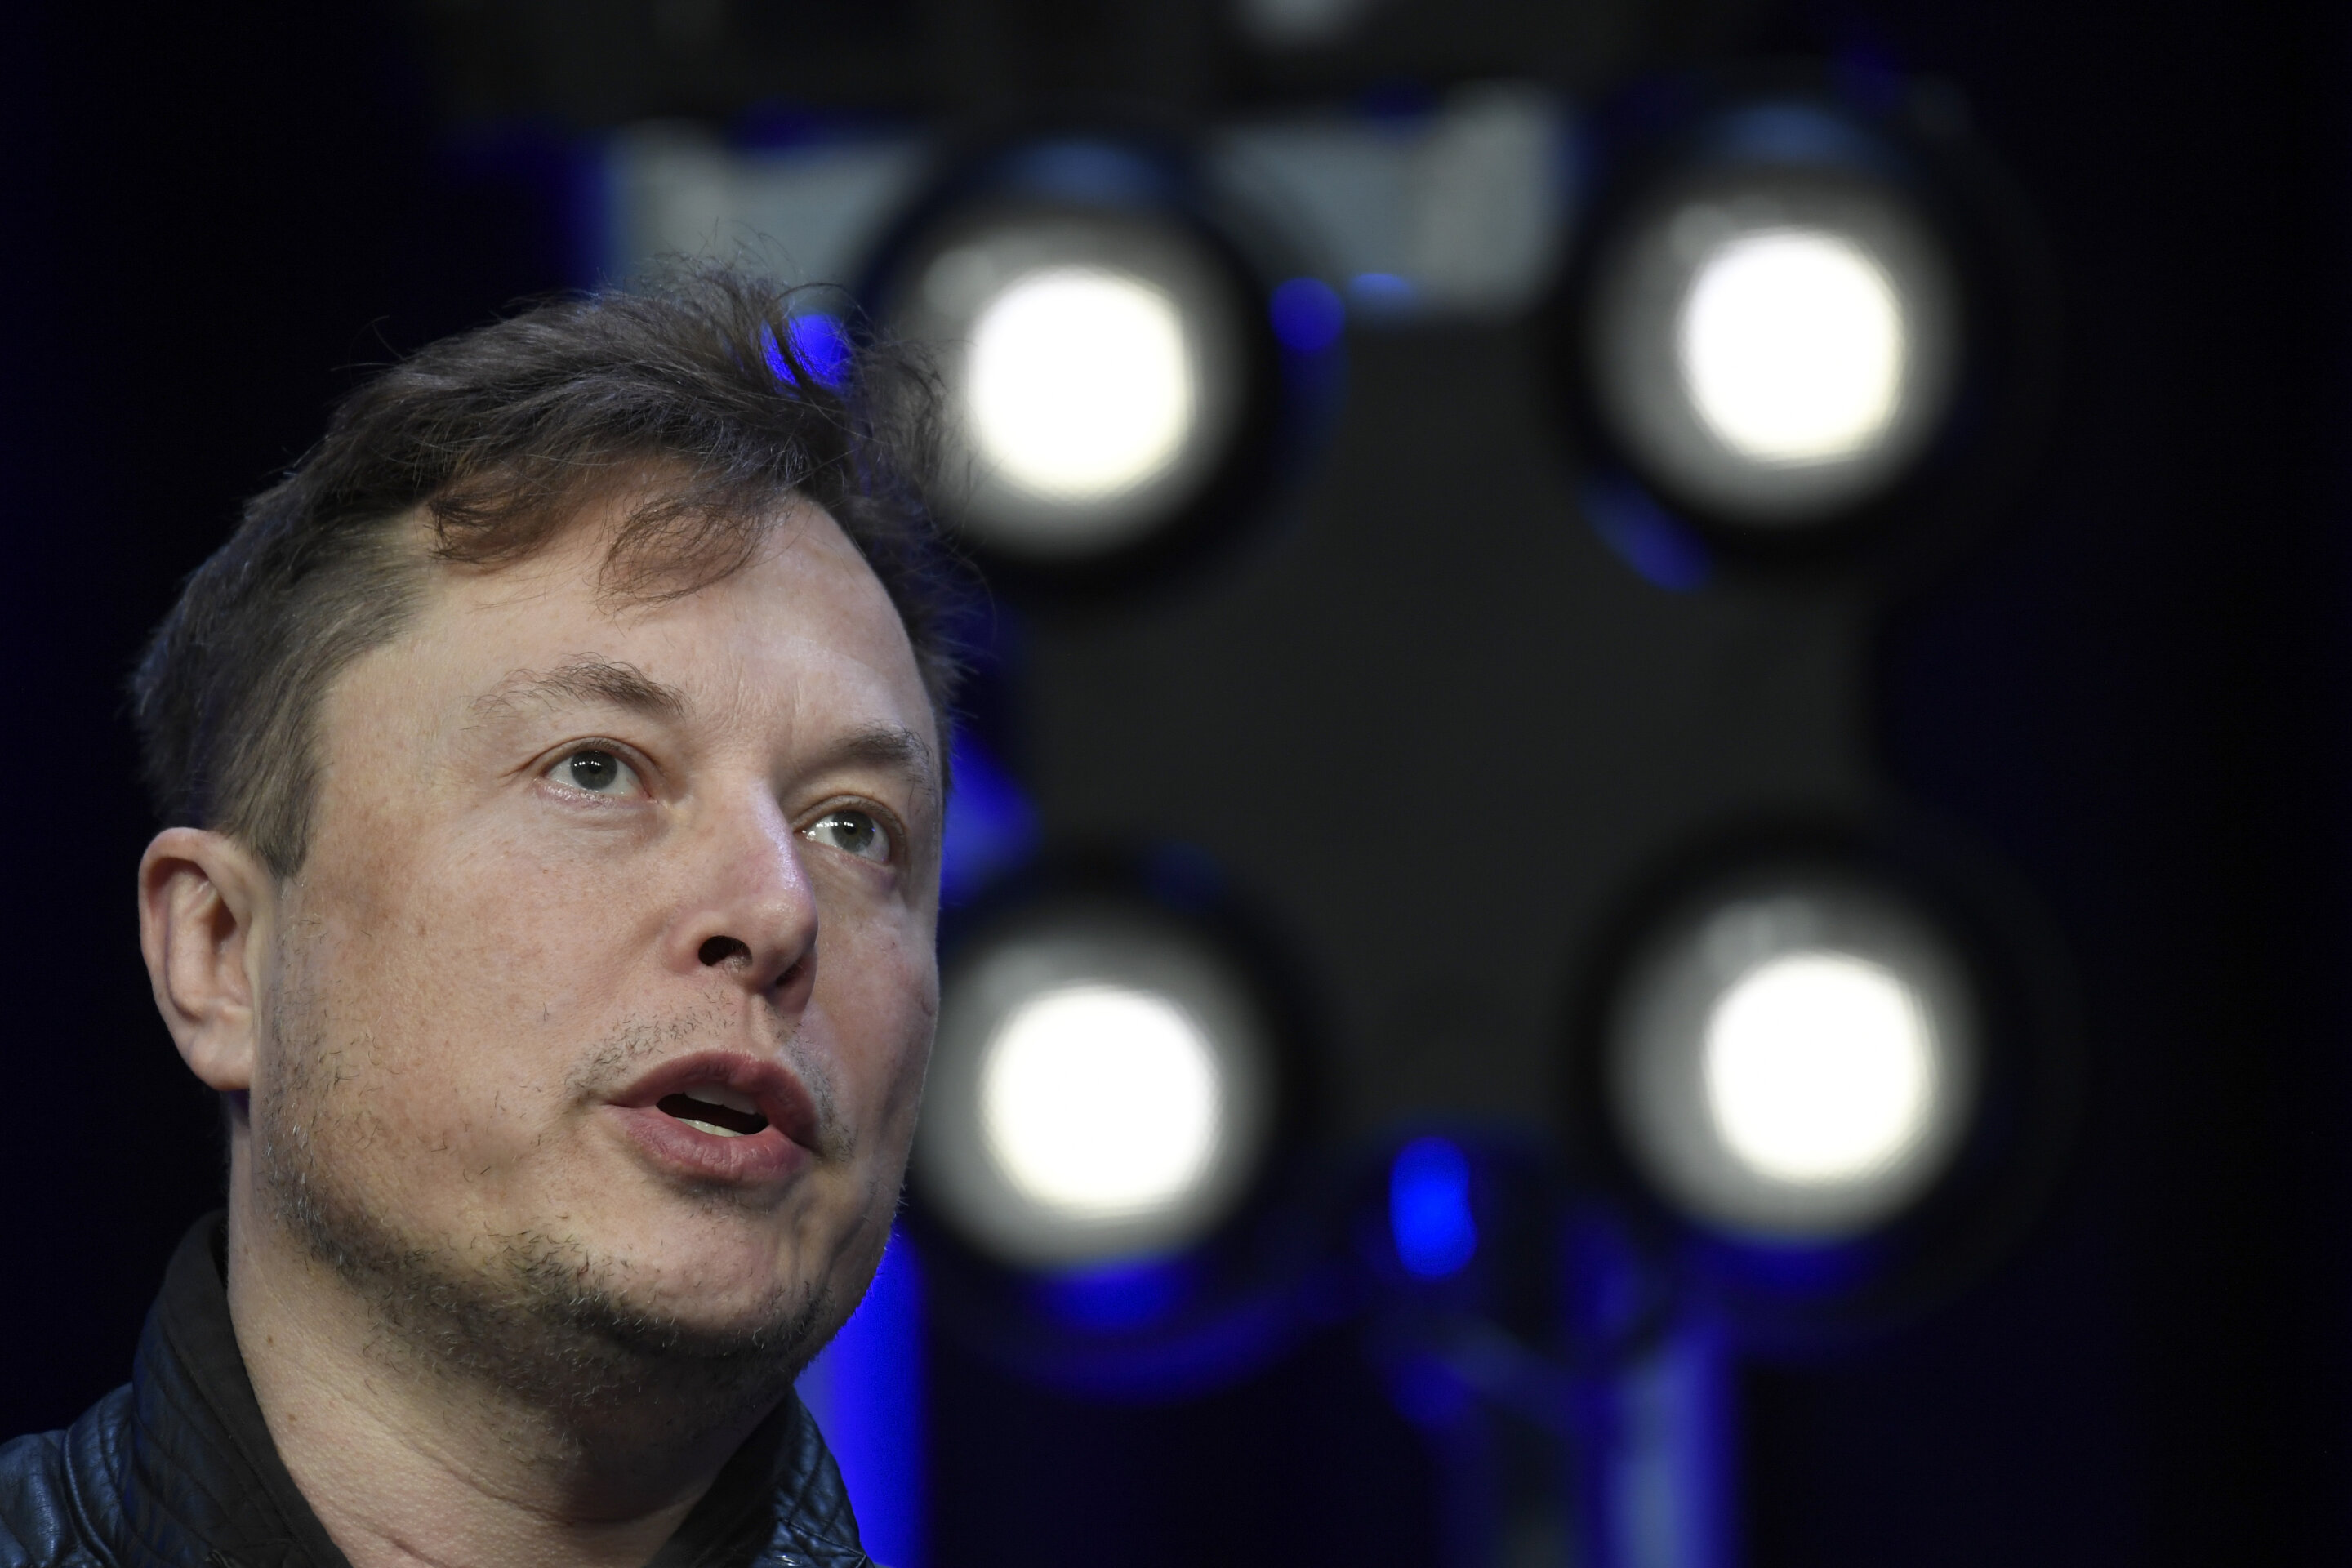 Report: Musk proposes going ahead with deal to buy Twitter